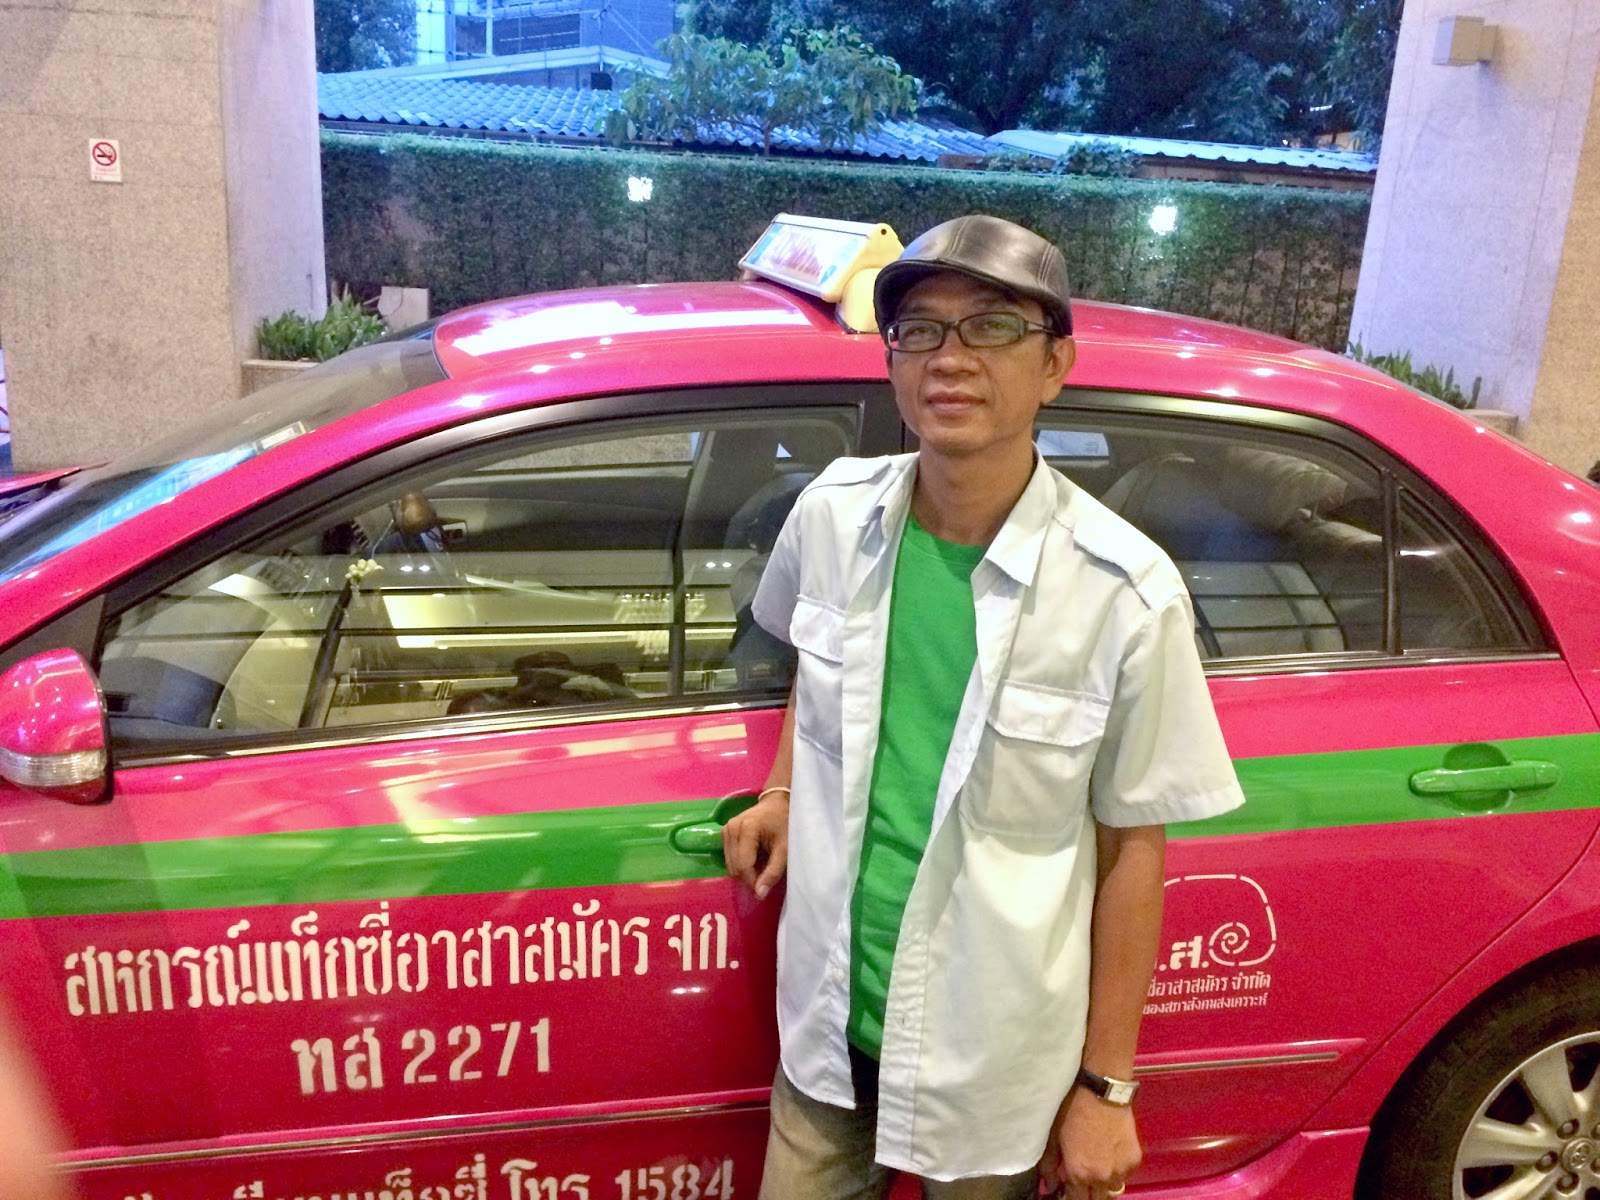 bangkok-s-best-taxi-driver-plus-two-more-according-to-mimi